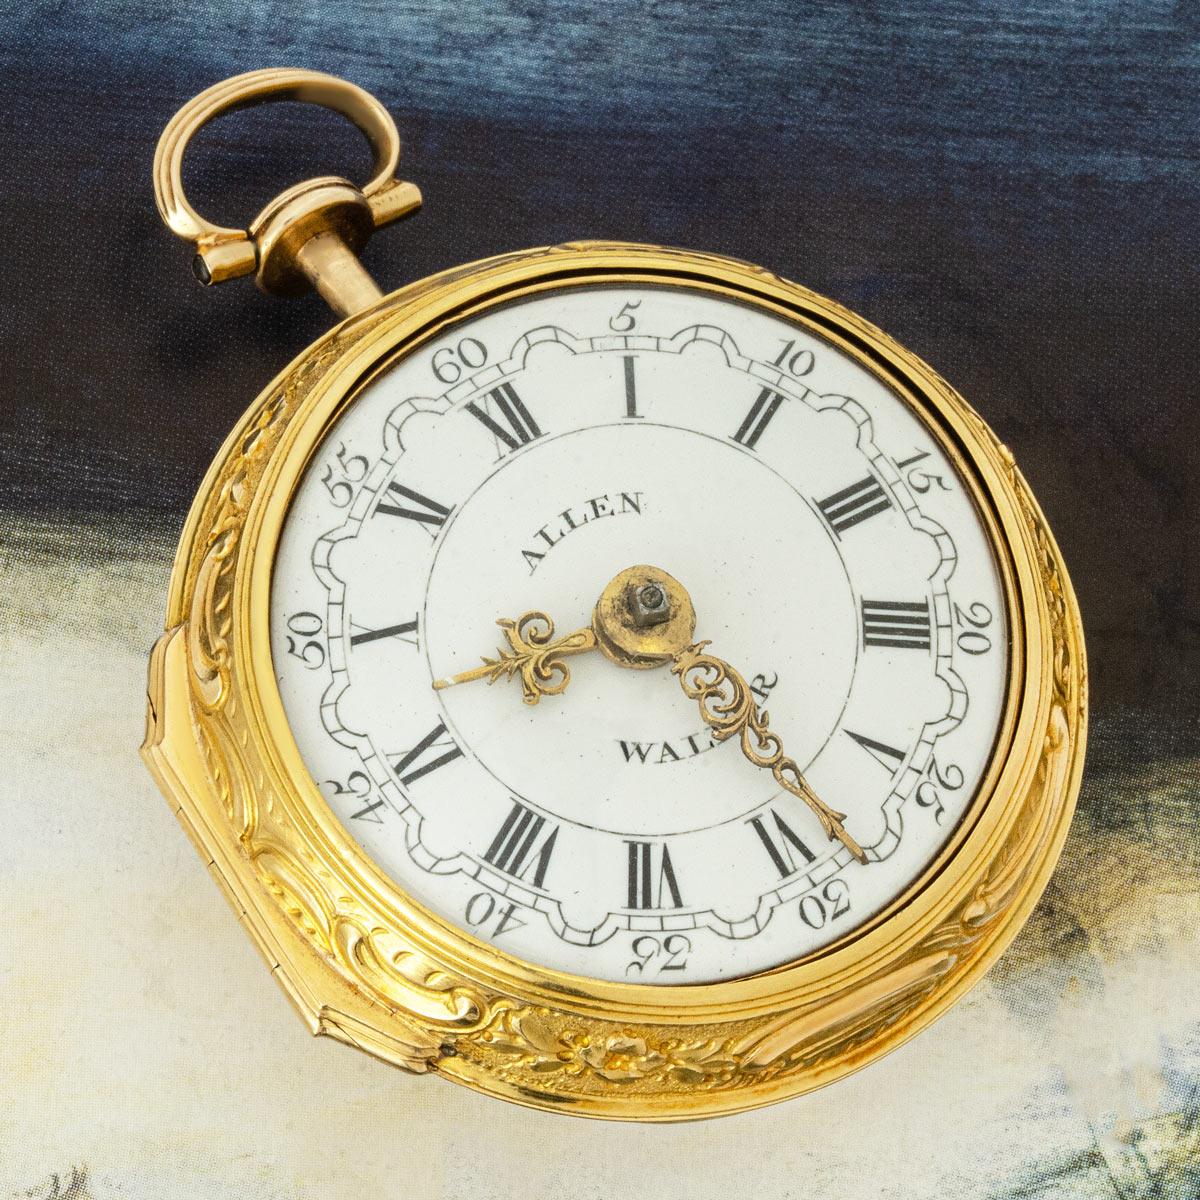 Allen Walker. A Rare Gold Repousse Triple Cased Verge Pocket Watch C1785 In Good Condition For Sale In London, GB